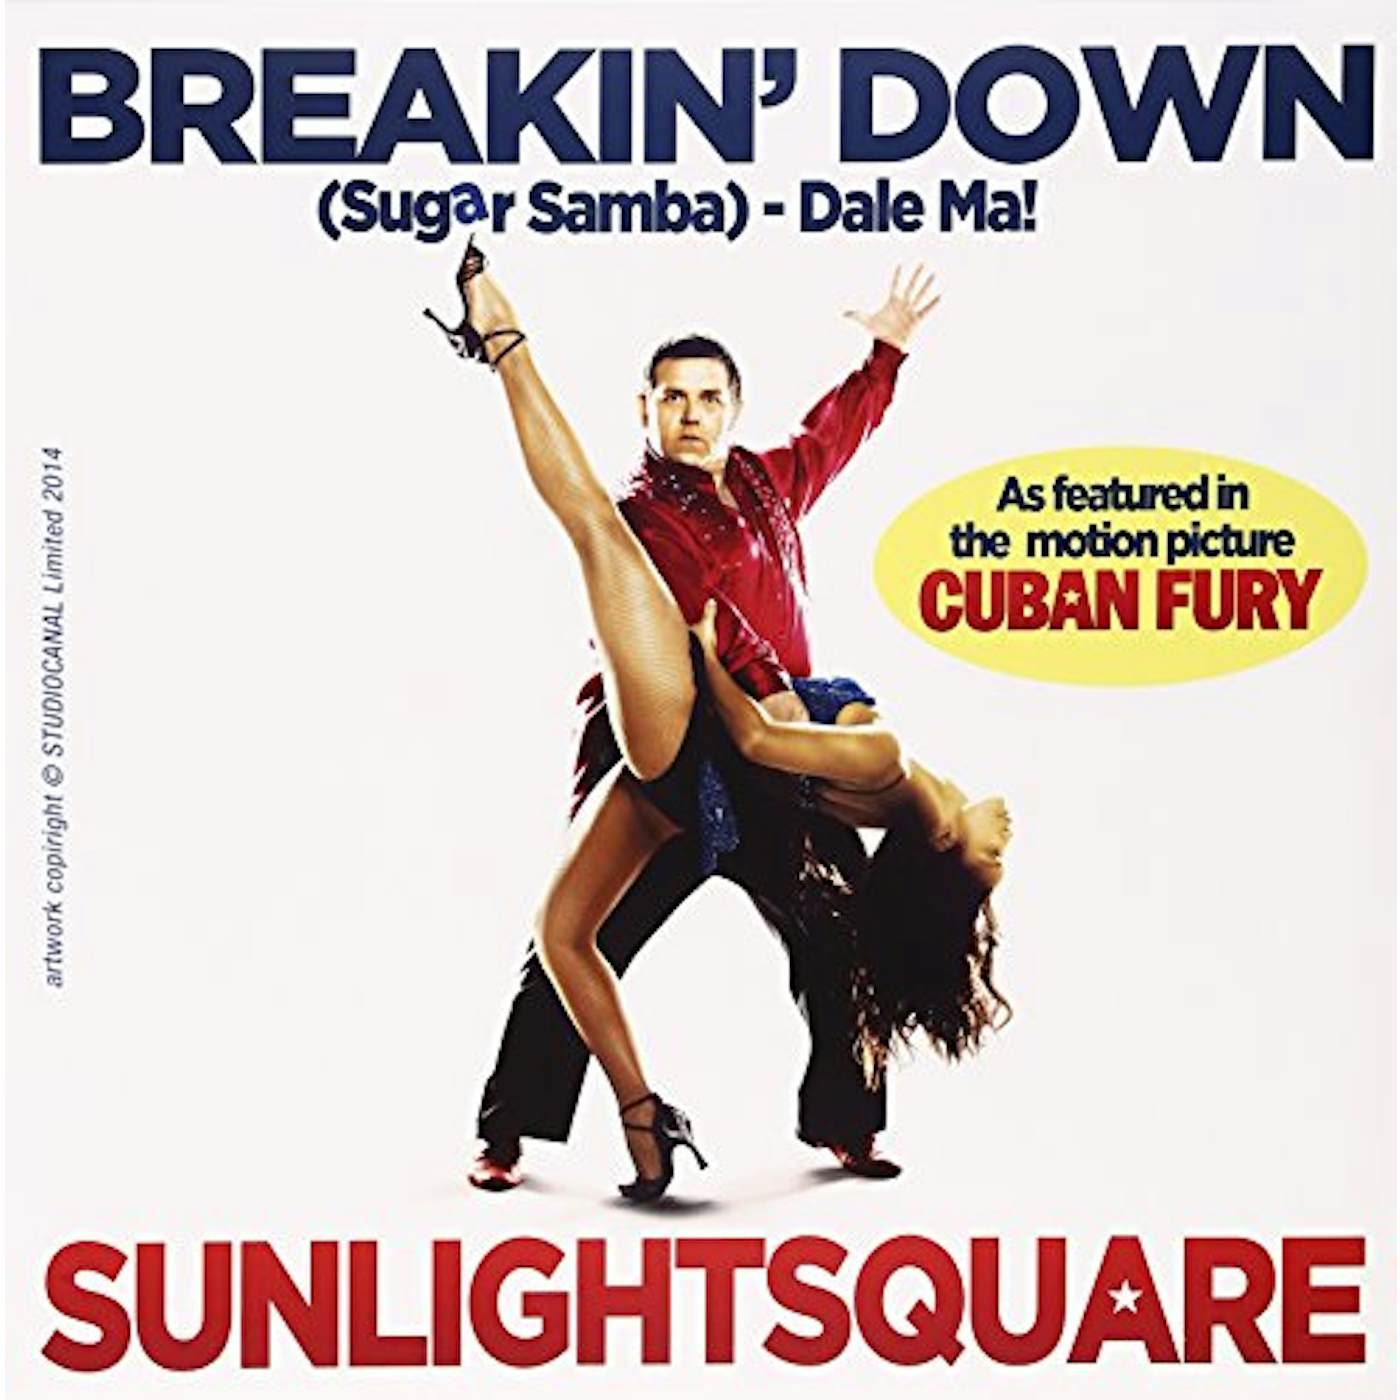 Sunlightsquare BREAKIN' DOWN (FROM THE FILM CUBAN FURY) Vinyl Record